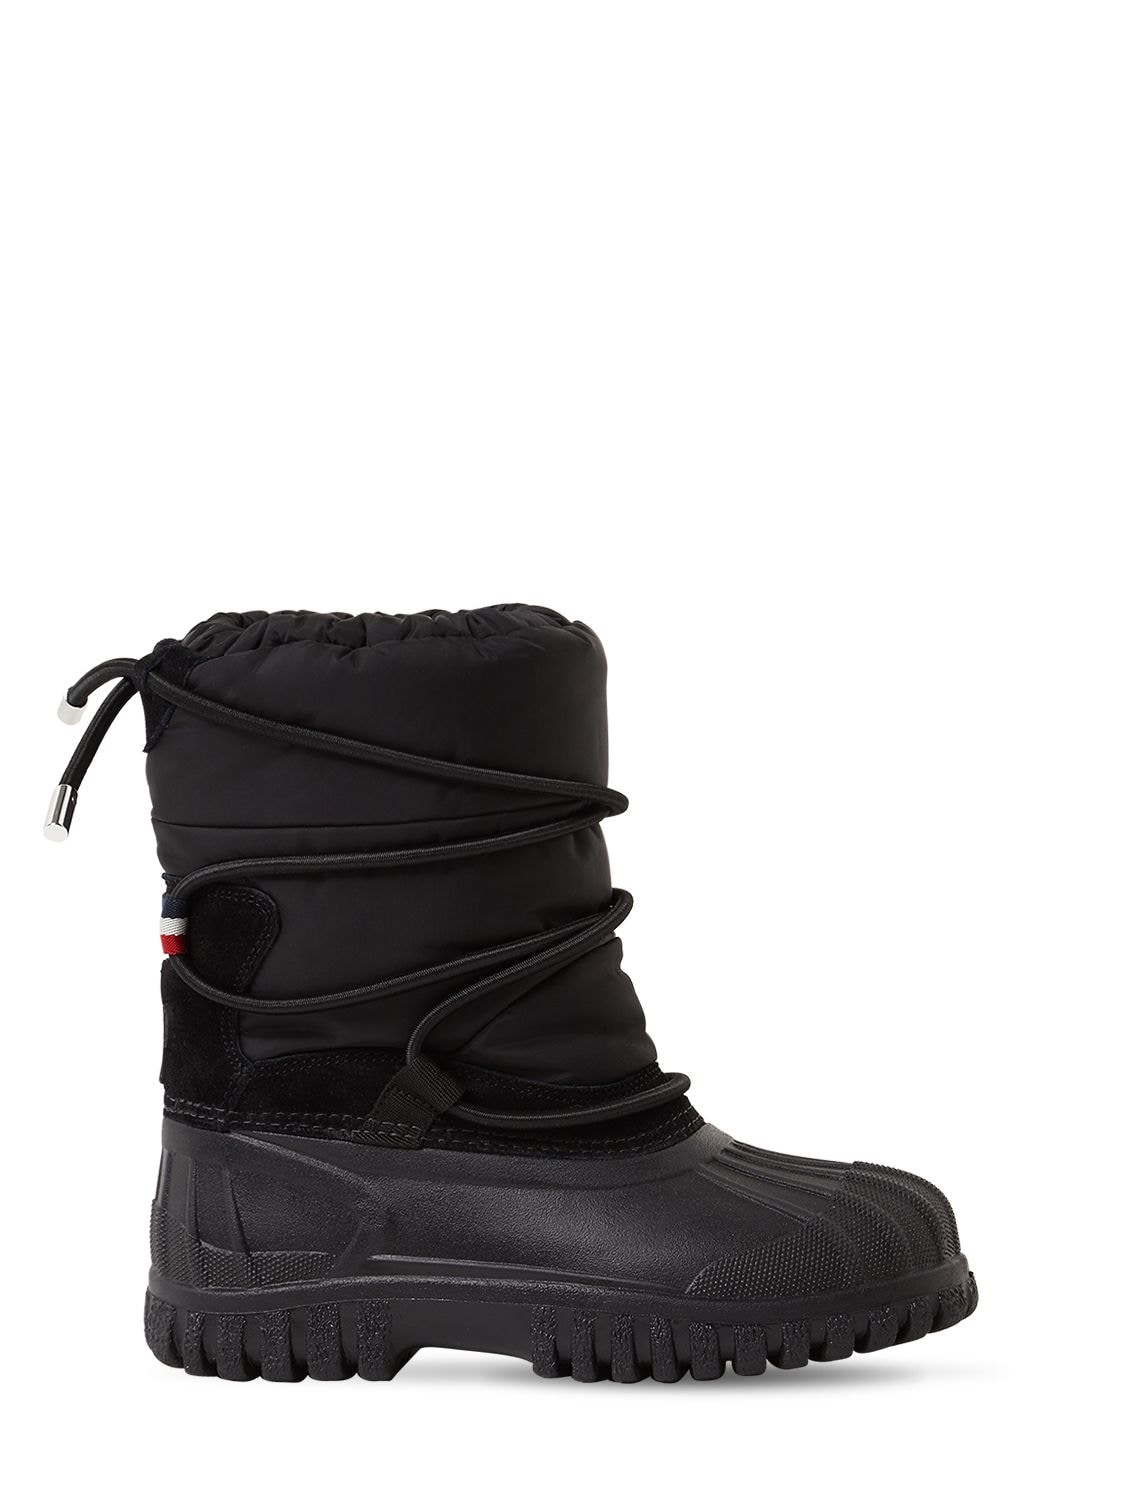 MONCLER Boots for Kids | ModeSens